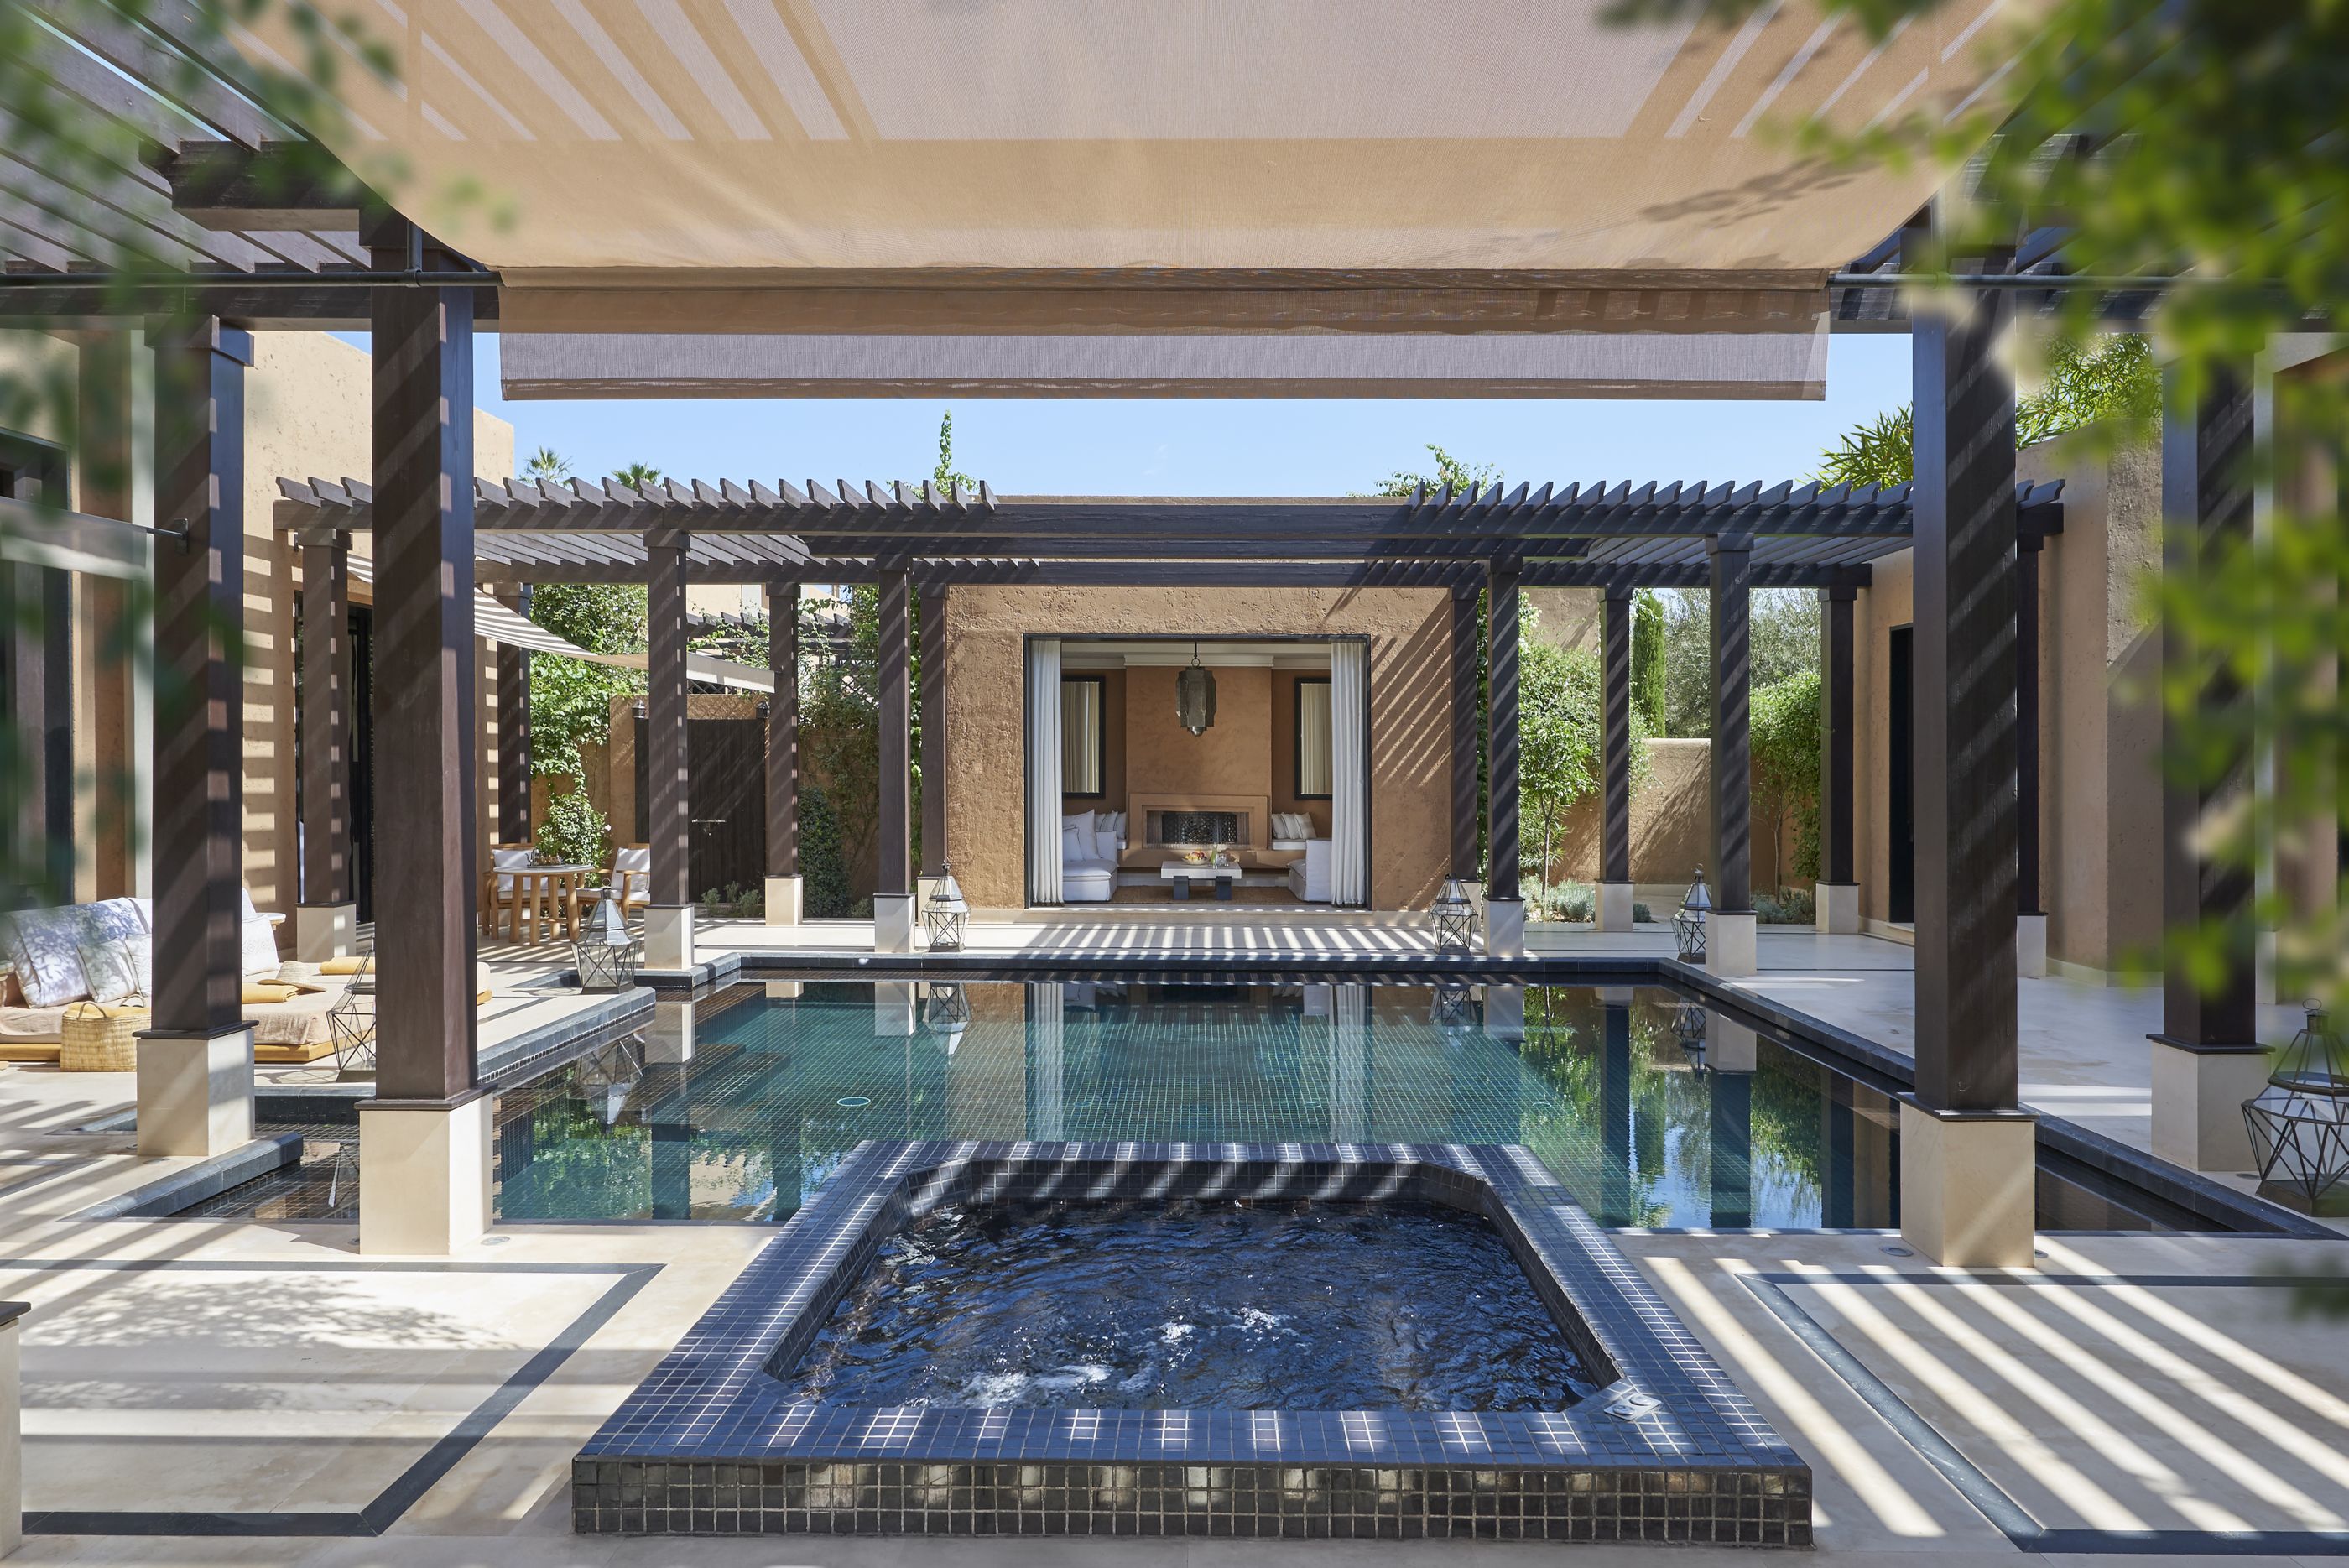 The pool and exterior areas of the Mandarin Oriental in Marrakech